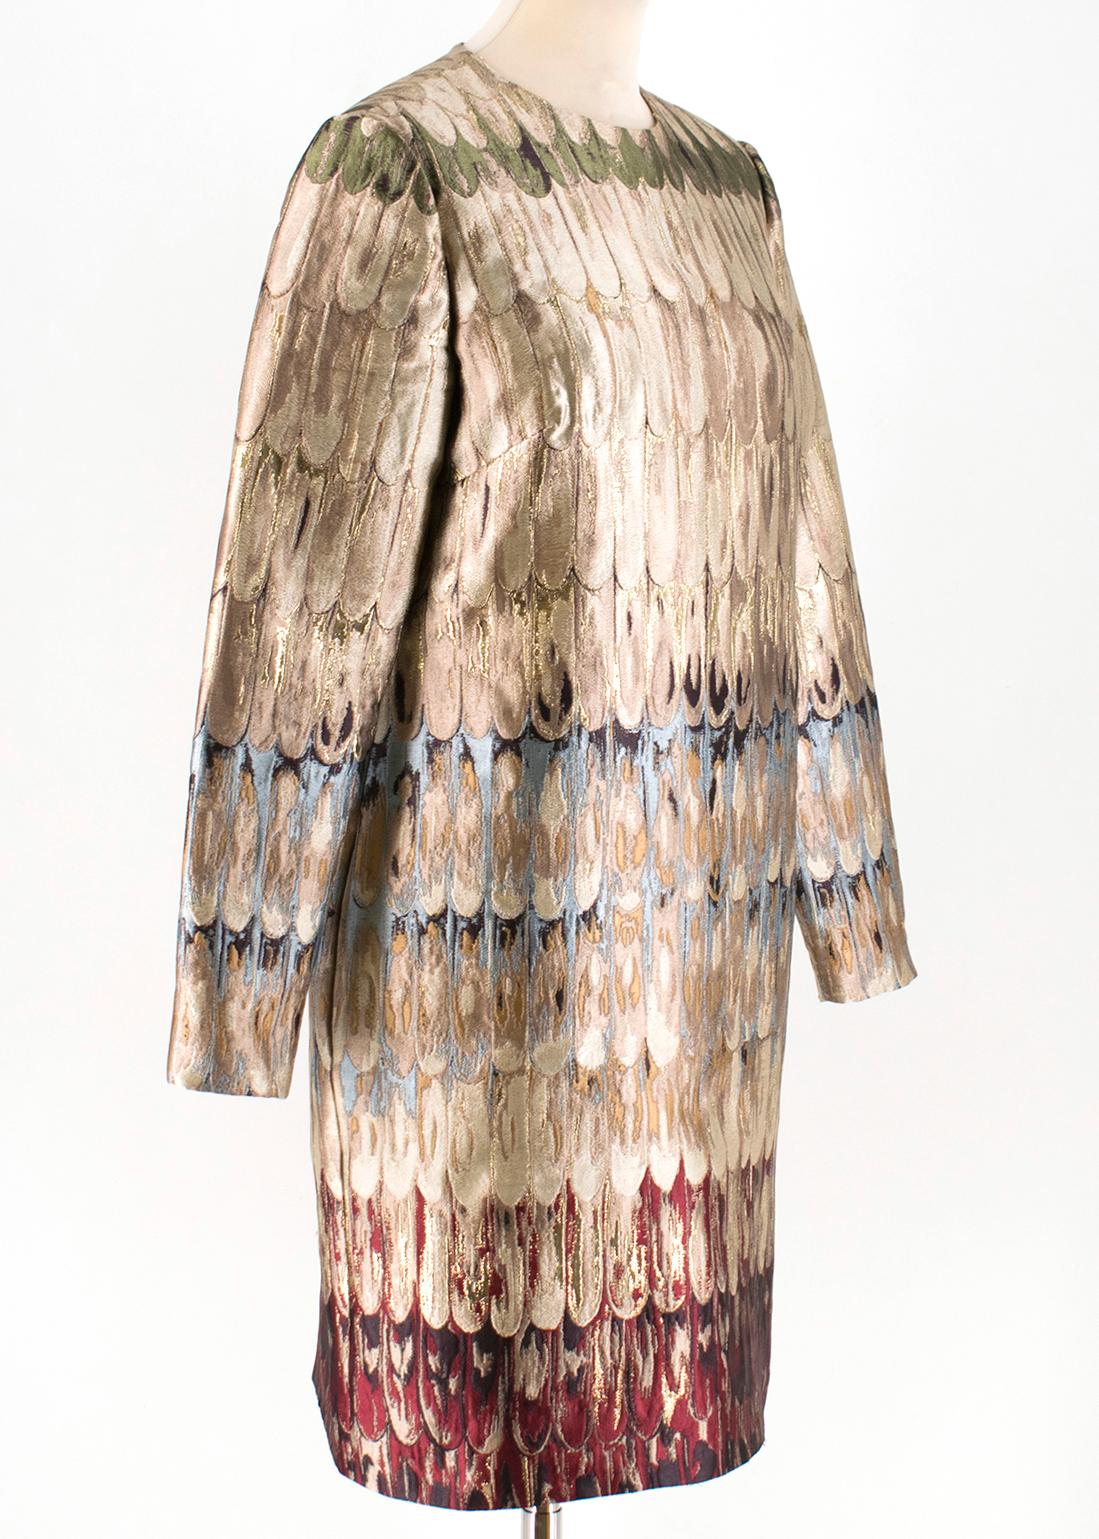 Valentino 'Feathered Colour' Shift Dress - Size US 8 5